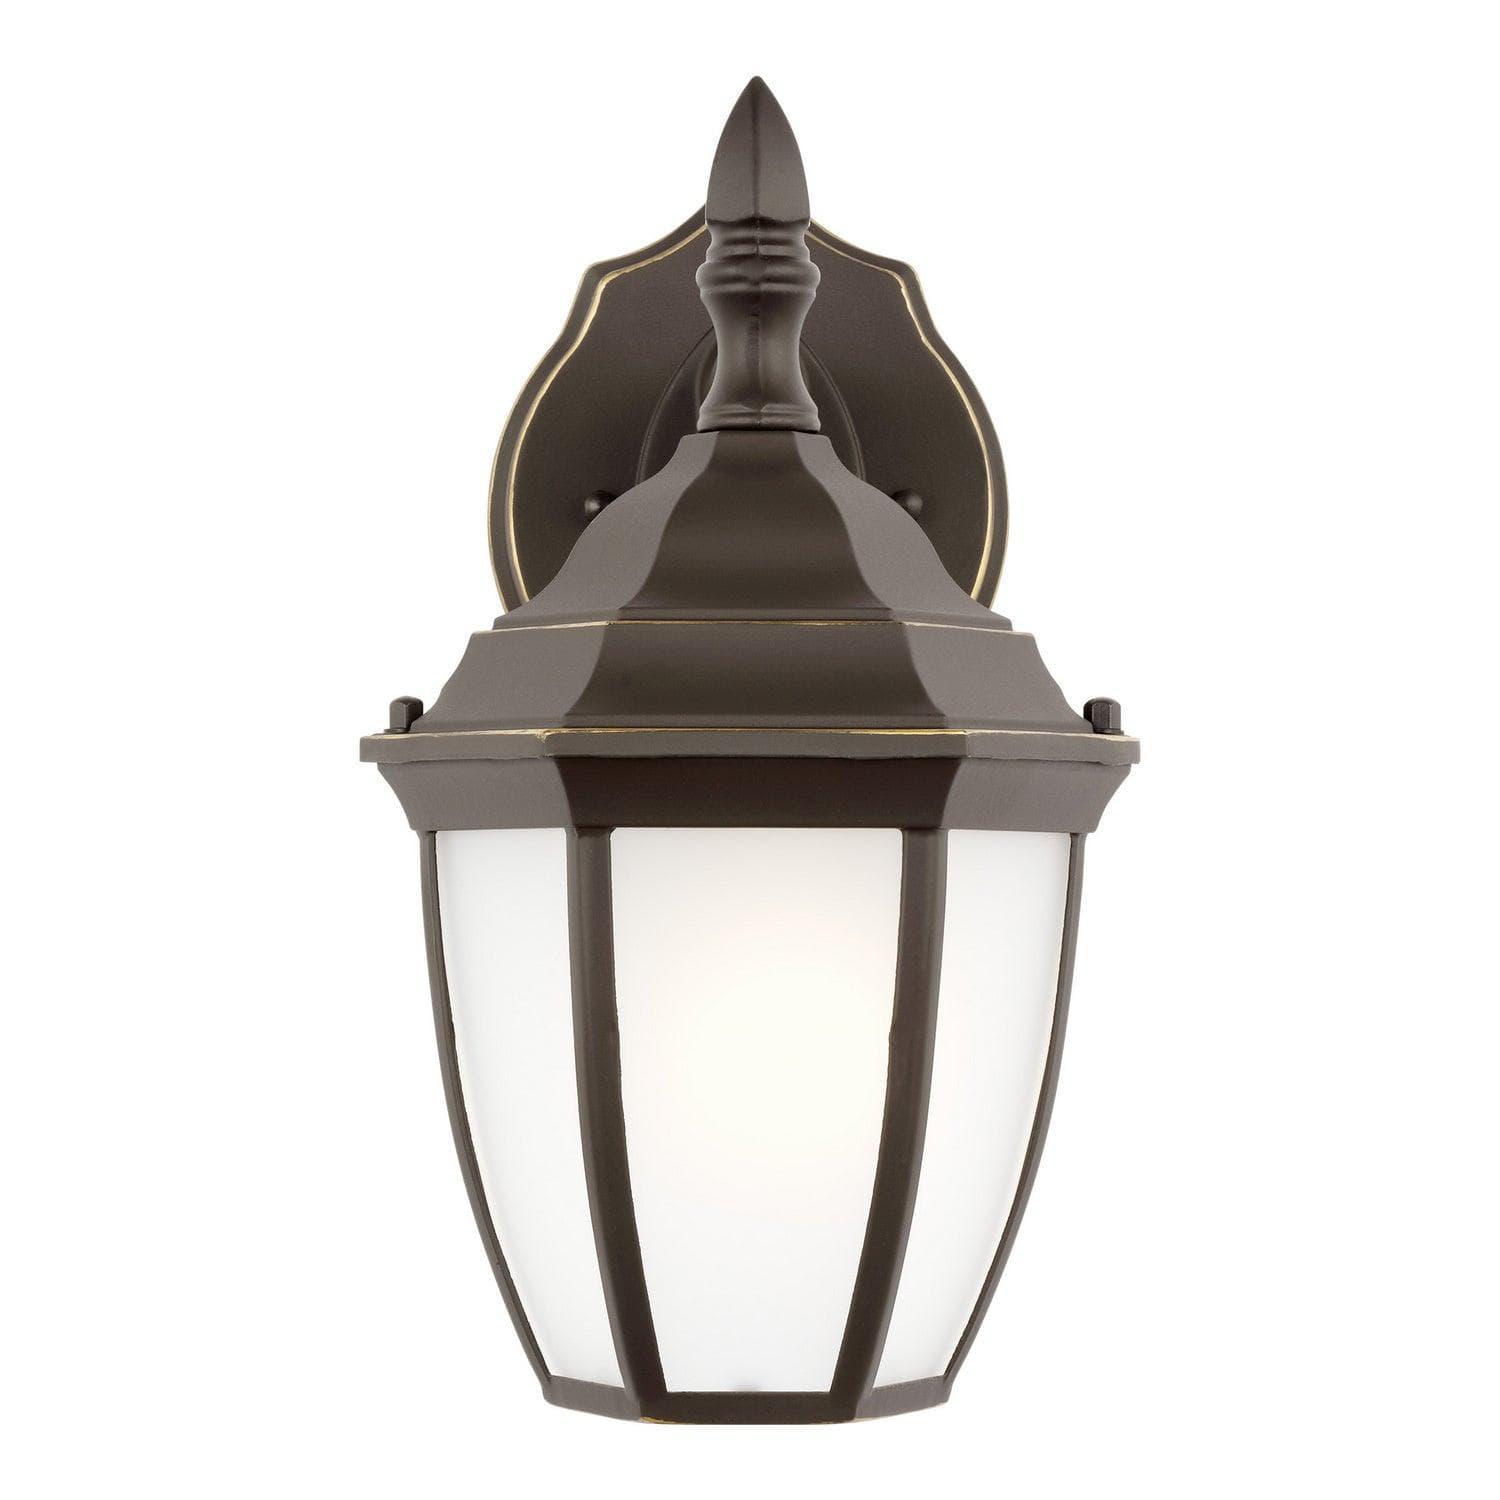 Generation Lighting - Bakersville Etched Rounded Outdoor Wall Lantern - 89936-71 | Montreal Lighting & Hardware